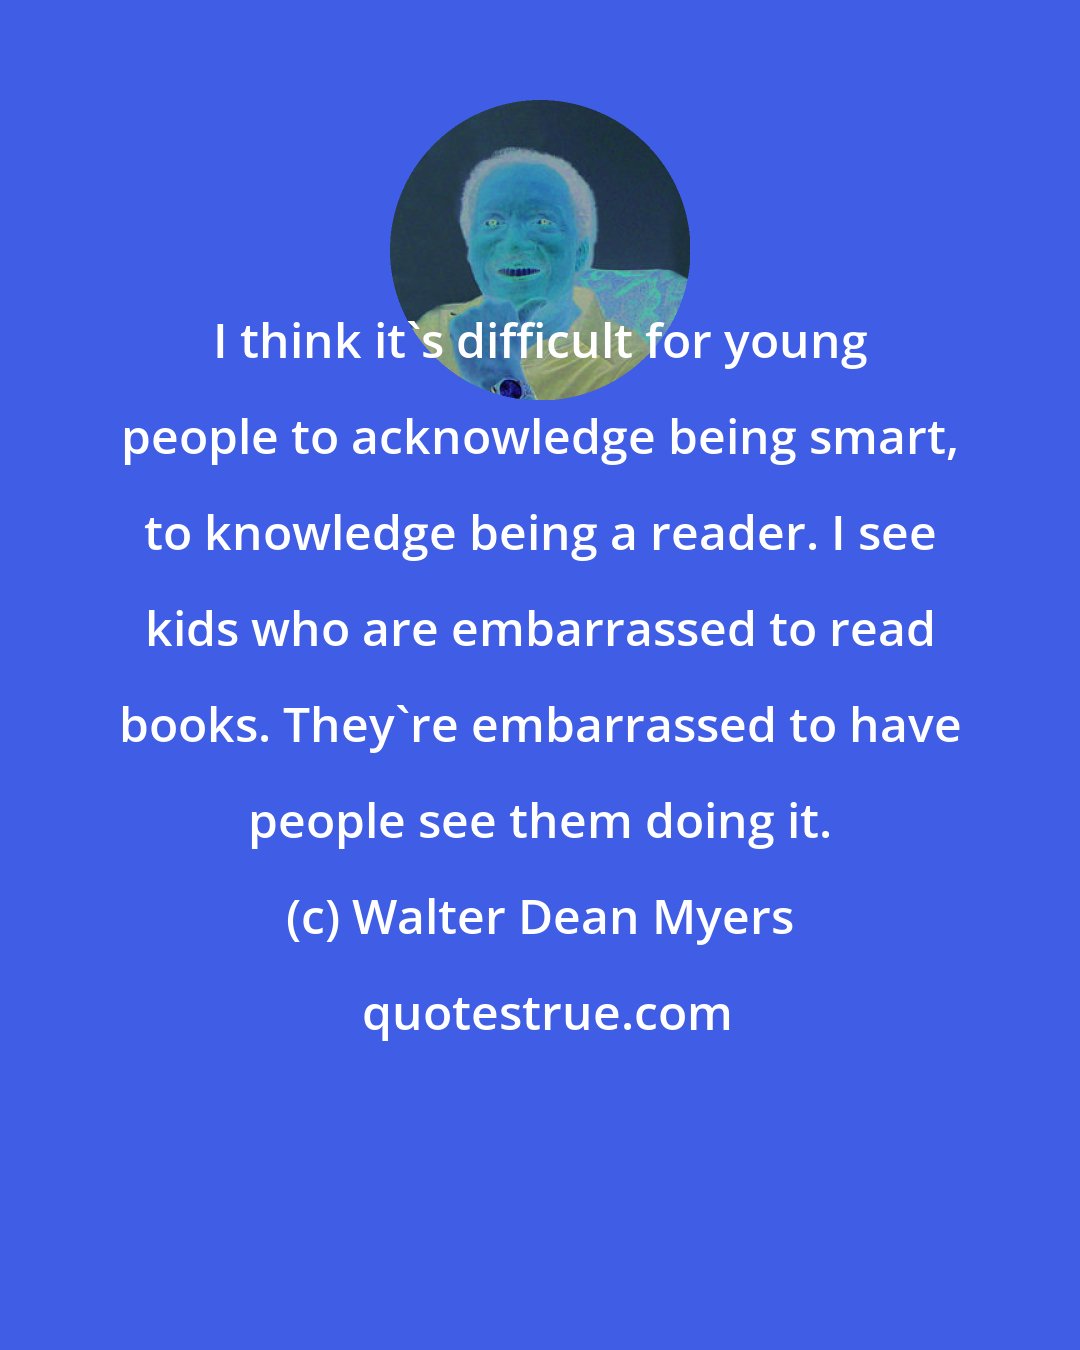 Walter Dean Myers: I think it's difficult for young people to acknowledge being smart, to knowledge being a reader. I see kids who are embarrassed to read books. They're embarrassed to have people see them doing it.